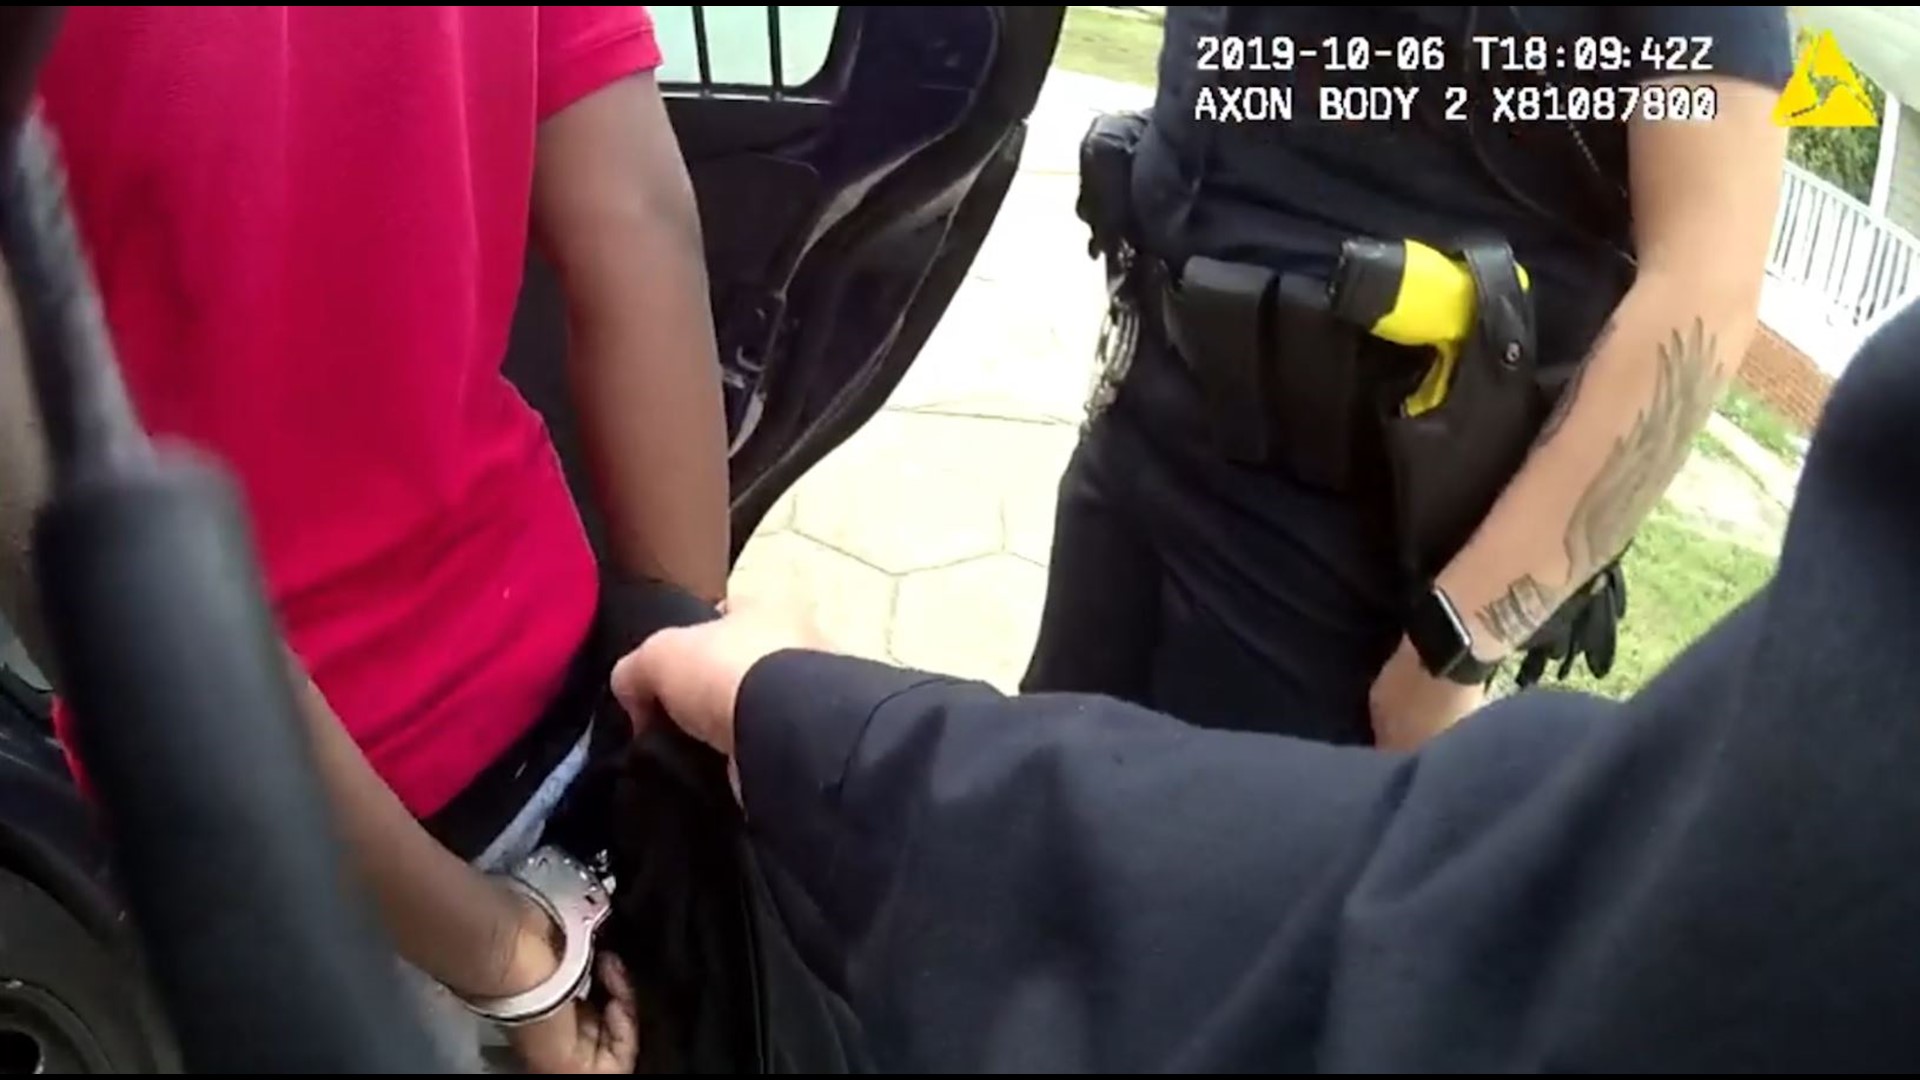 The Reveal investigates the case of a 10-year-old being handcuffed and arrested by Atlanta police after a neighborhood dispute.